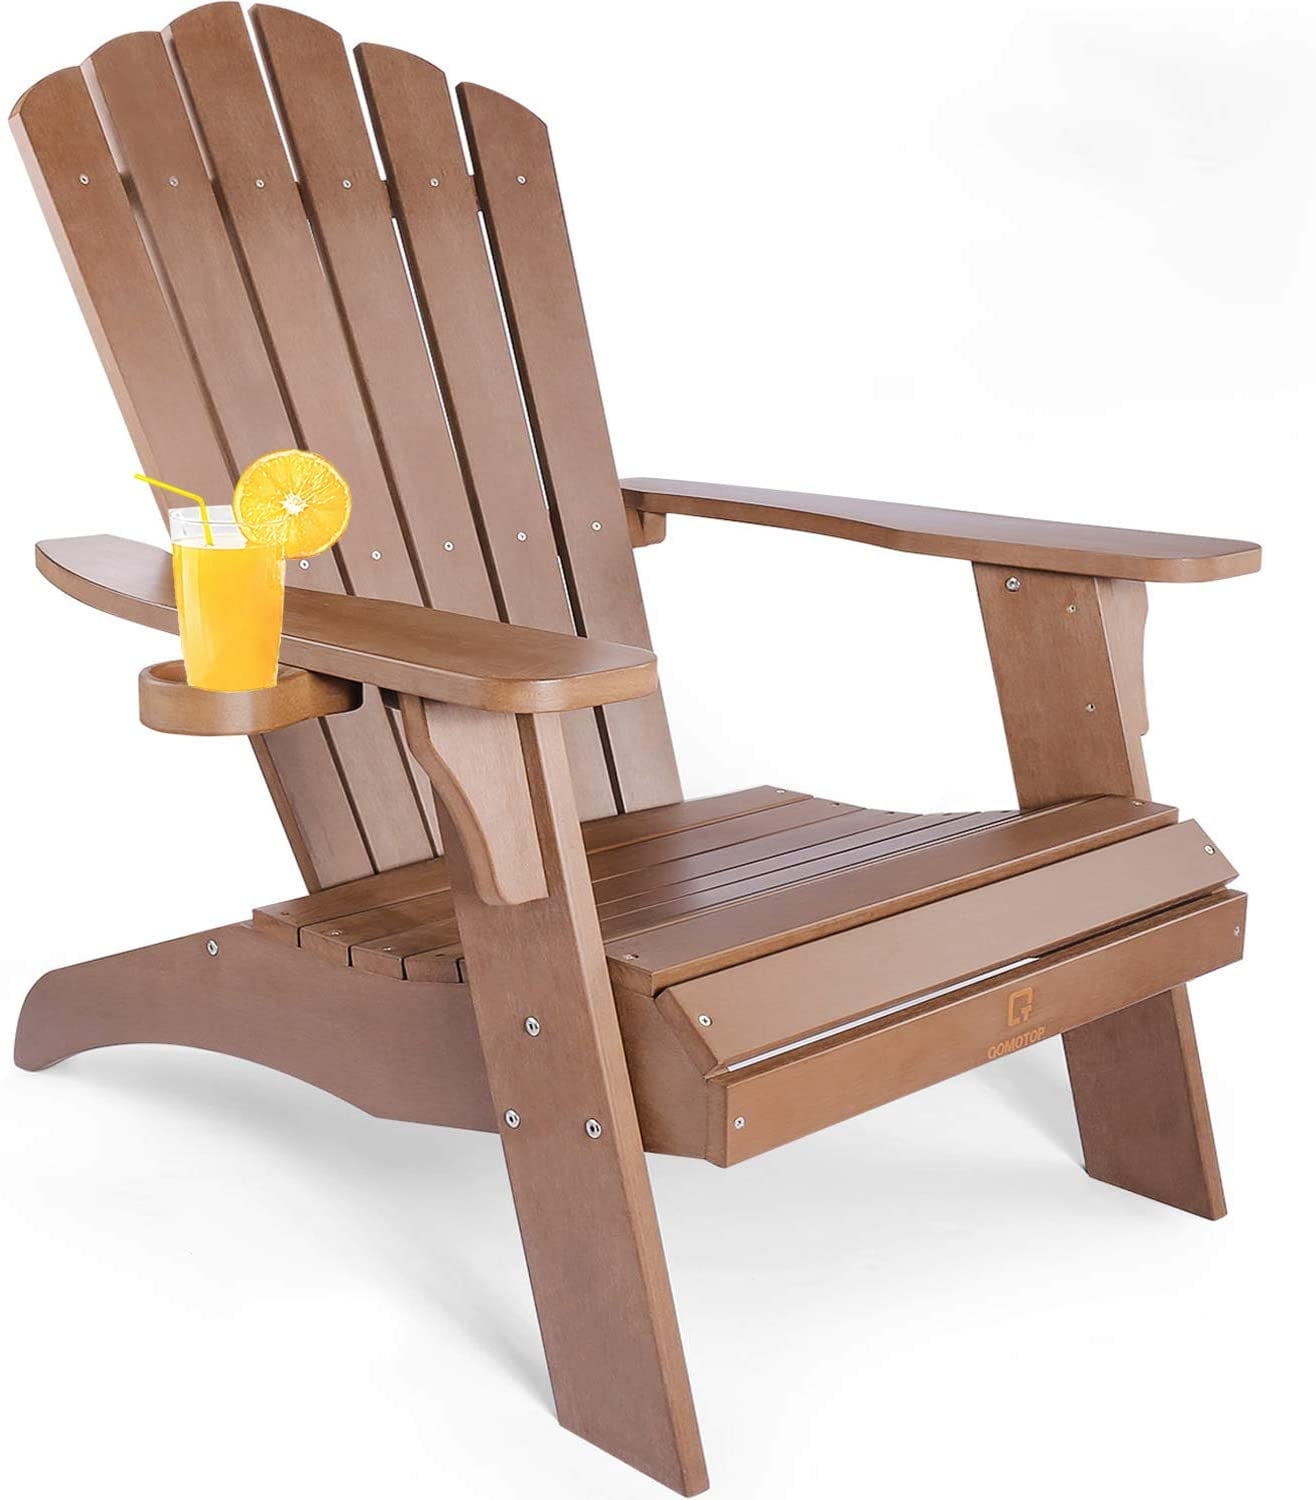 MTDHKX Wood Lumber Adirondack Chair with Cup Holder 33L 32W 25H All-Weather Chair for Fire Pit & Garden Black Fade-Resistant Lounge Chair with 350lbs Duty Rating 